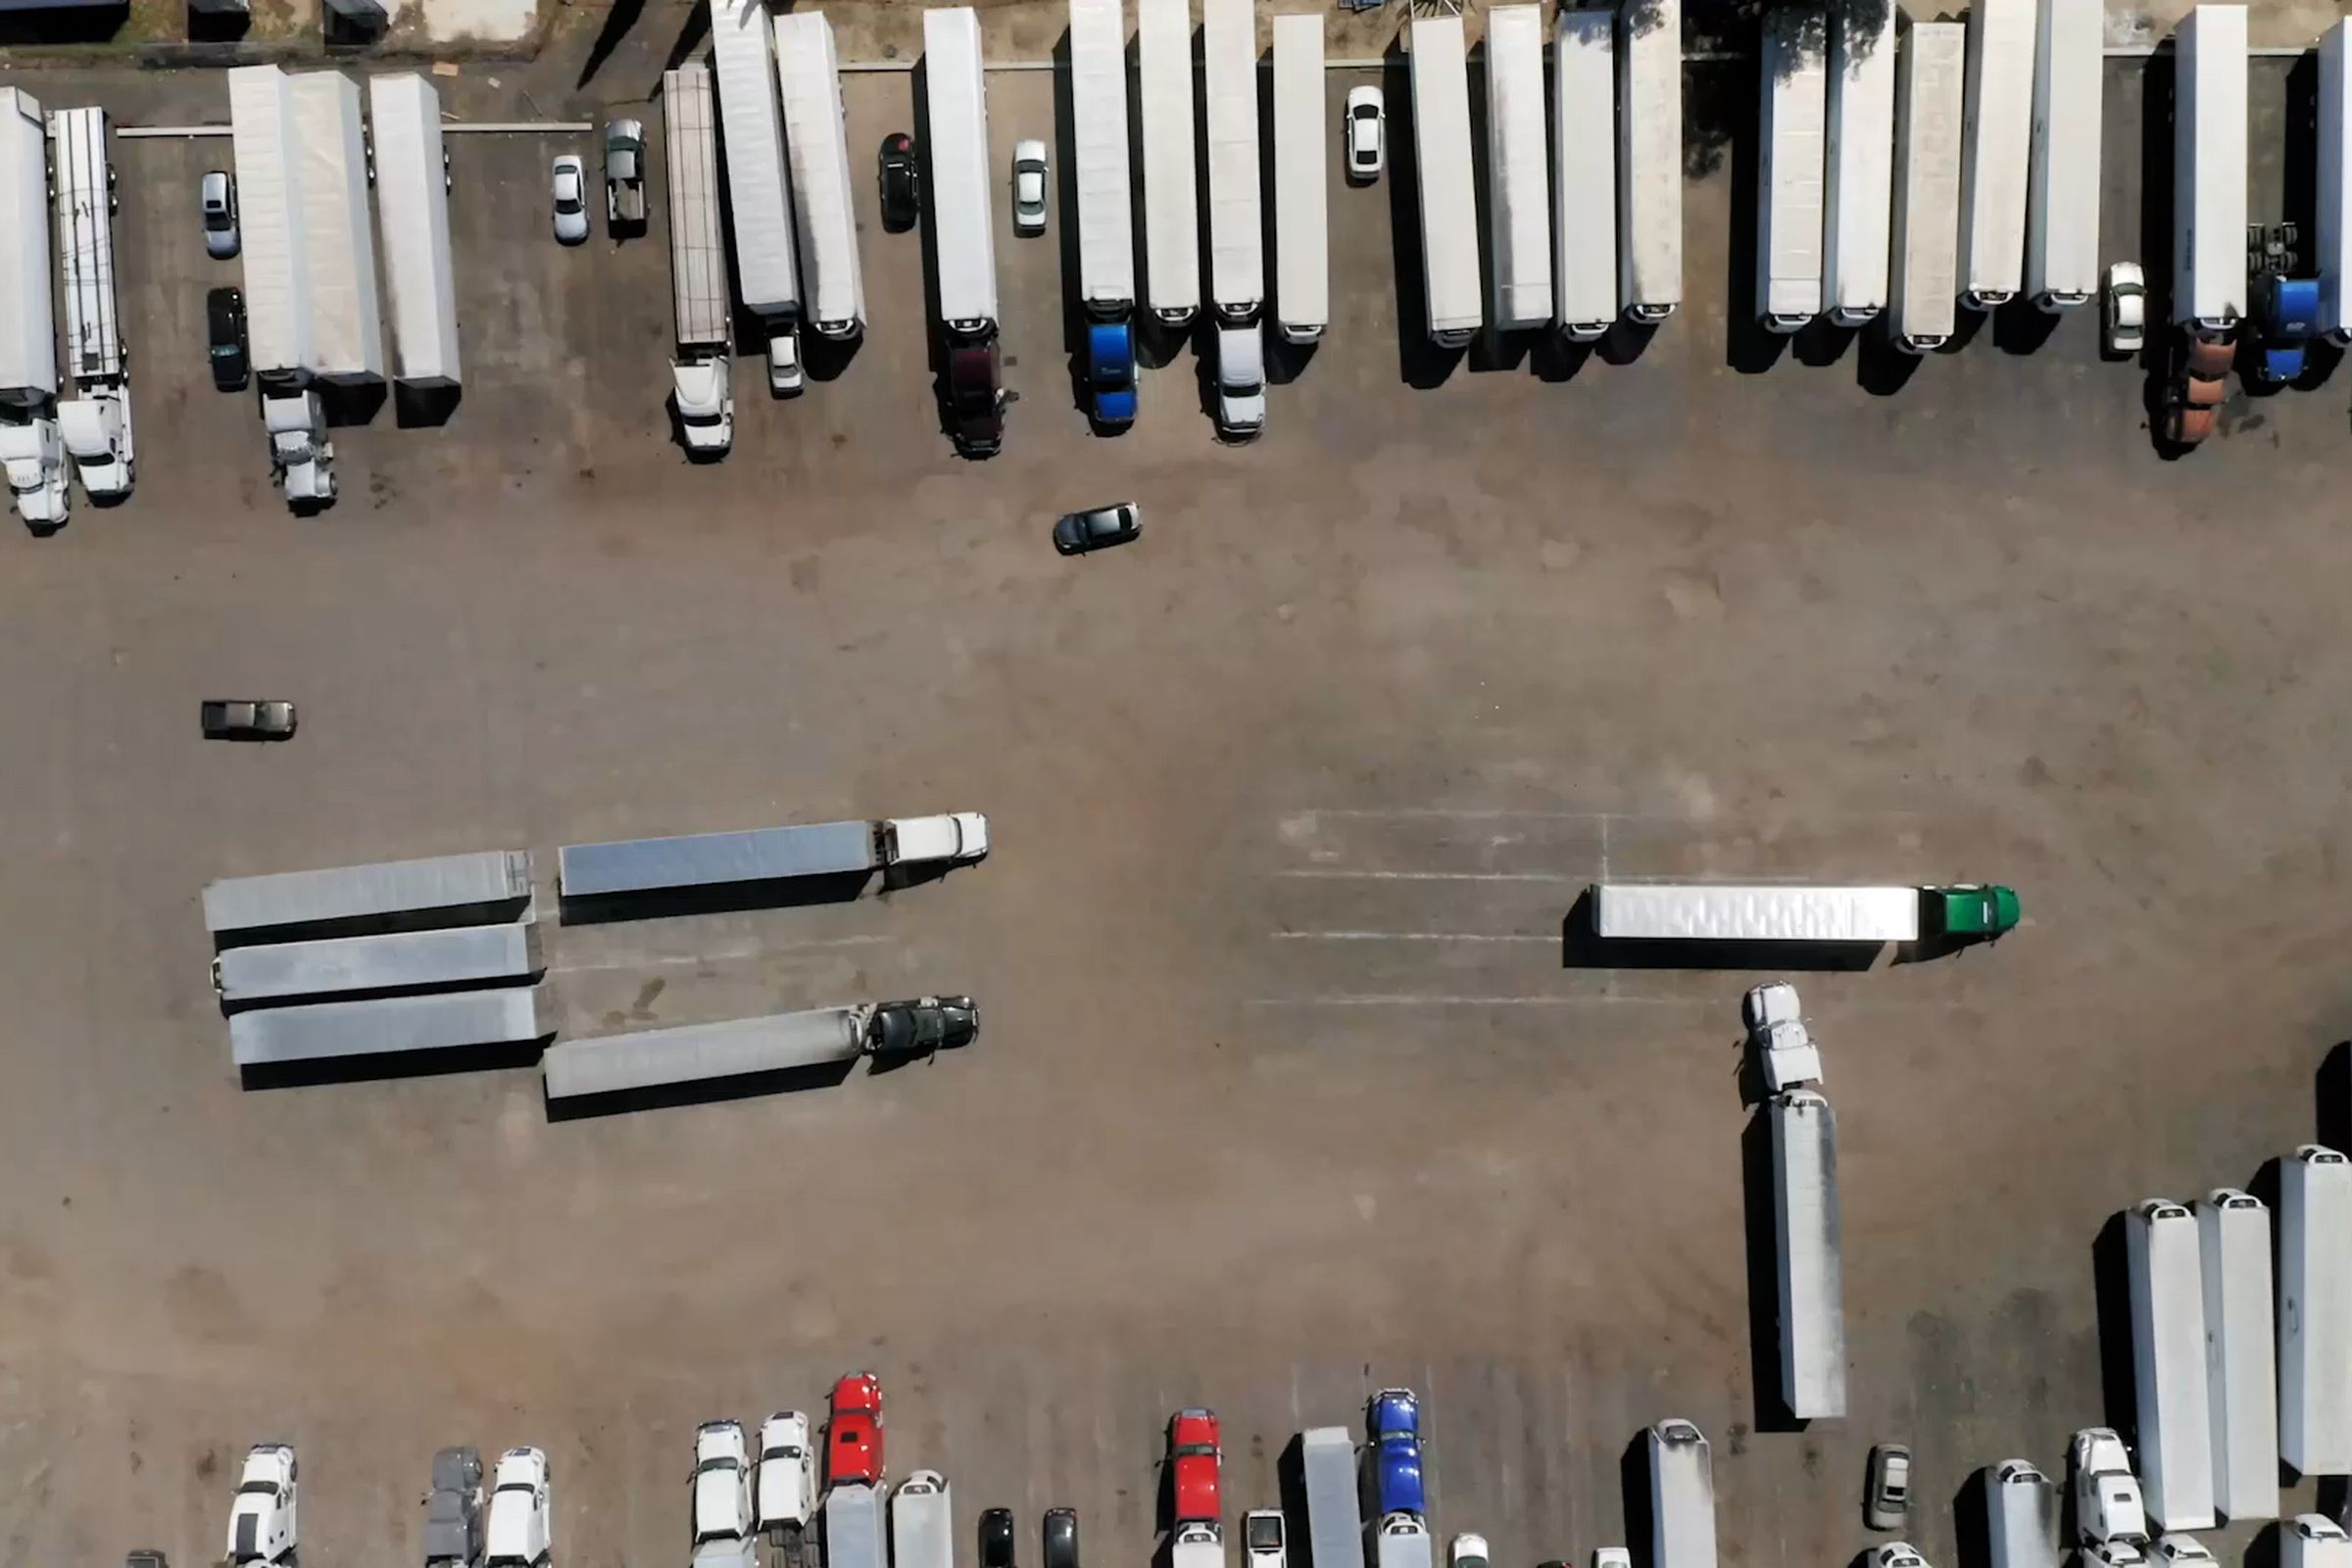 An aerial view of many semi-trailer trucks in a parking lot.